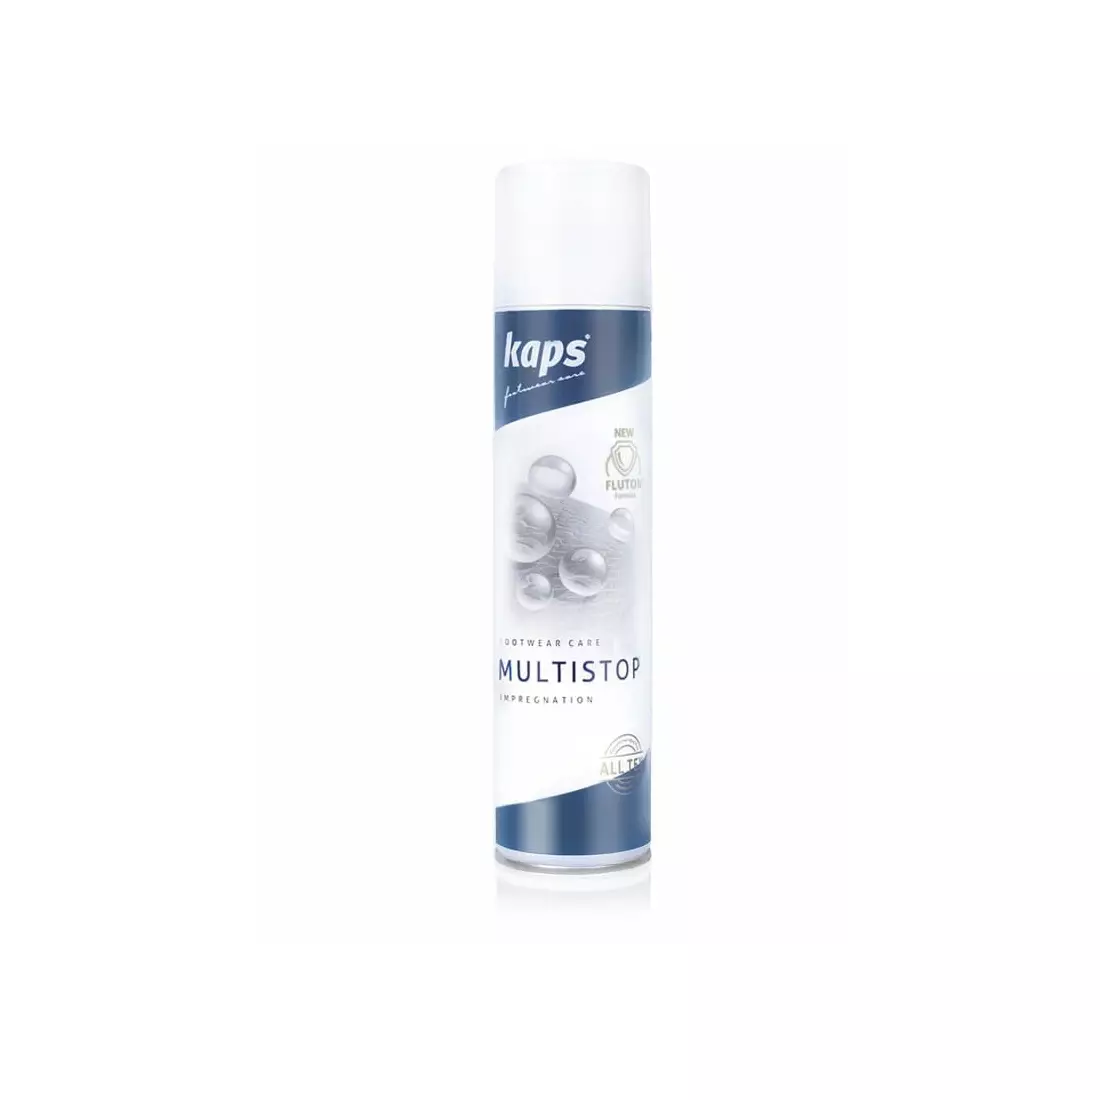 KAPS MULTISTOP impregnation for leather and fabrics, 400ml